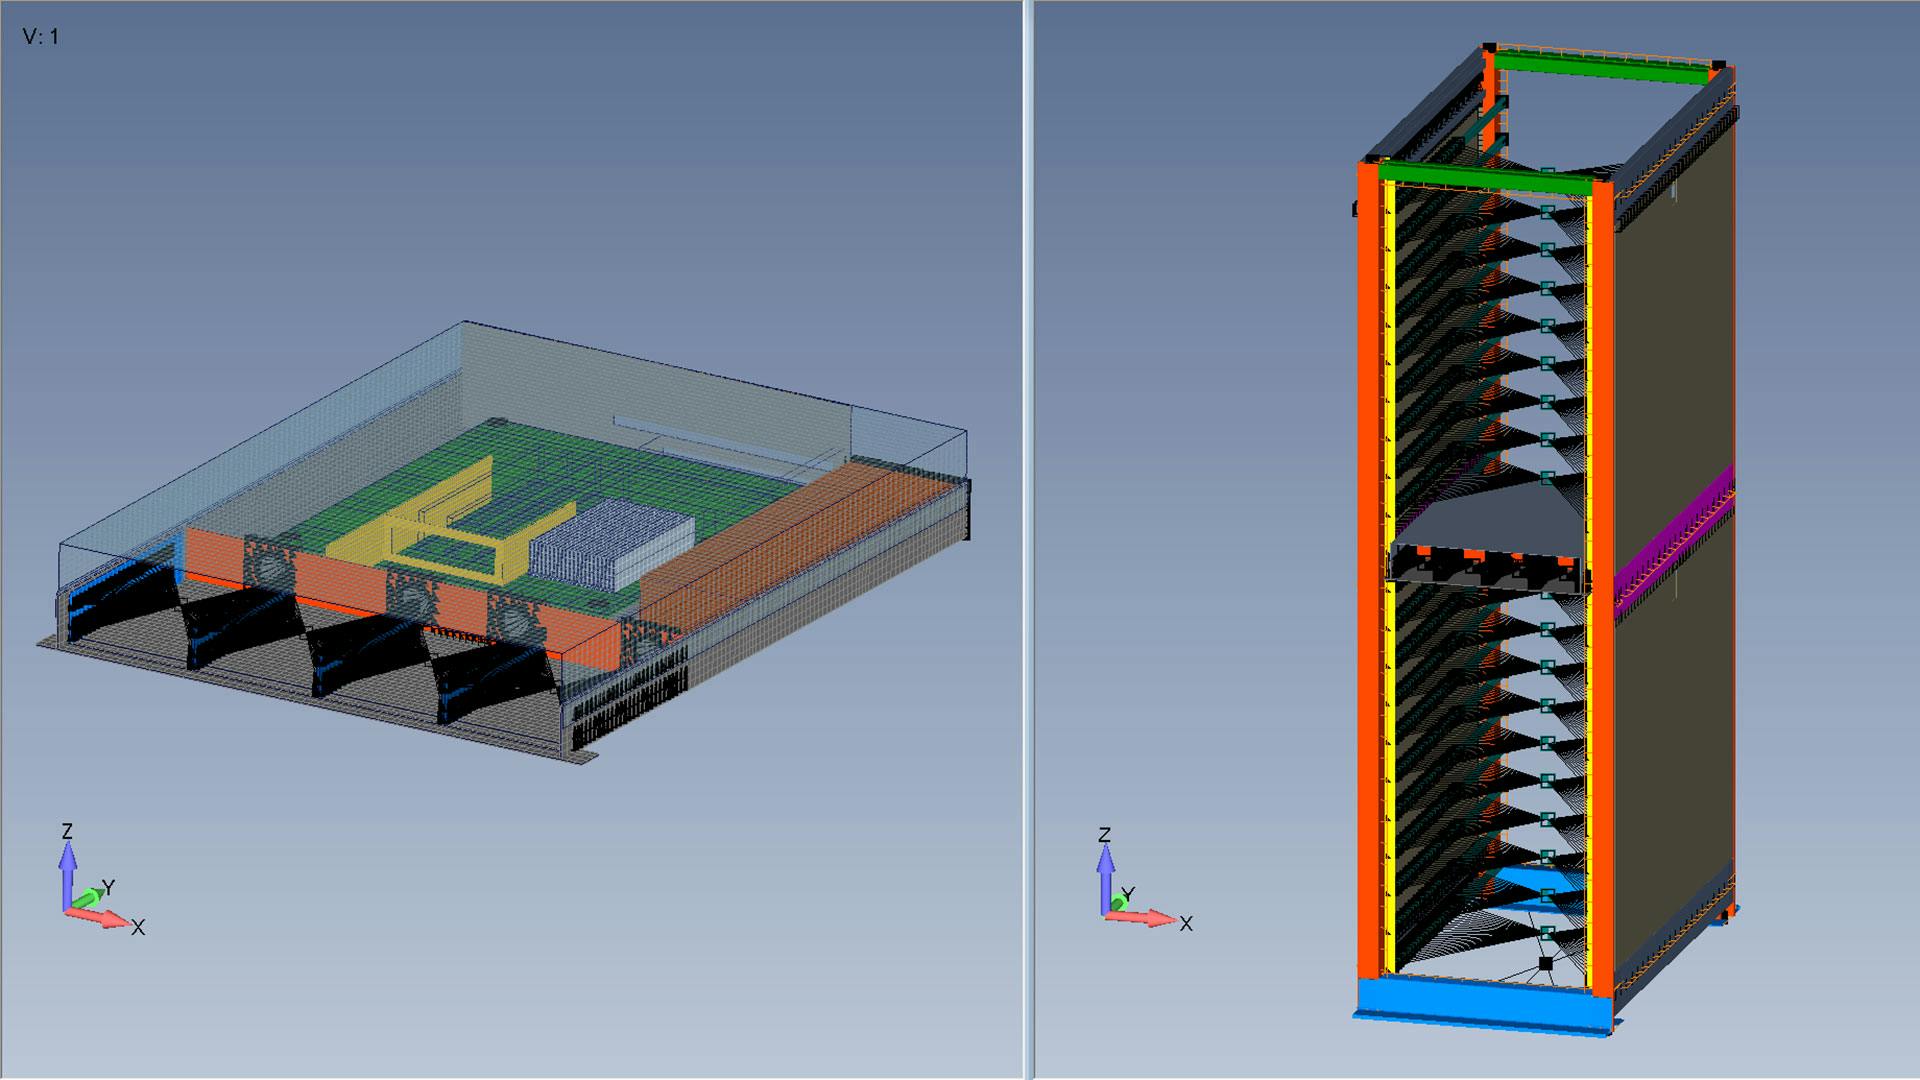 Dynamic analysis performed using Simcenter Femap FEA software